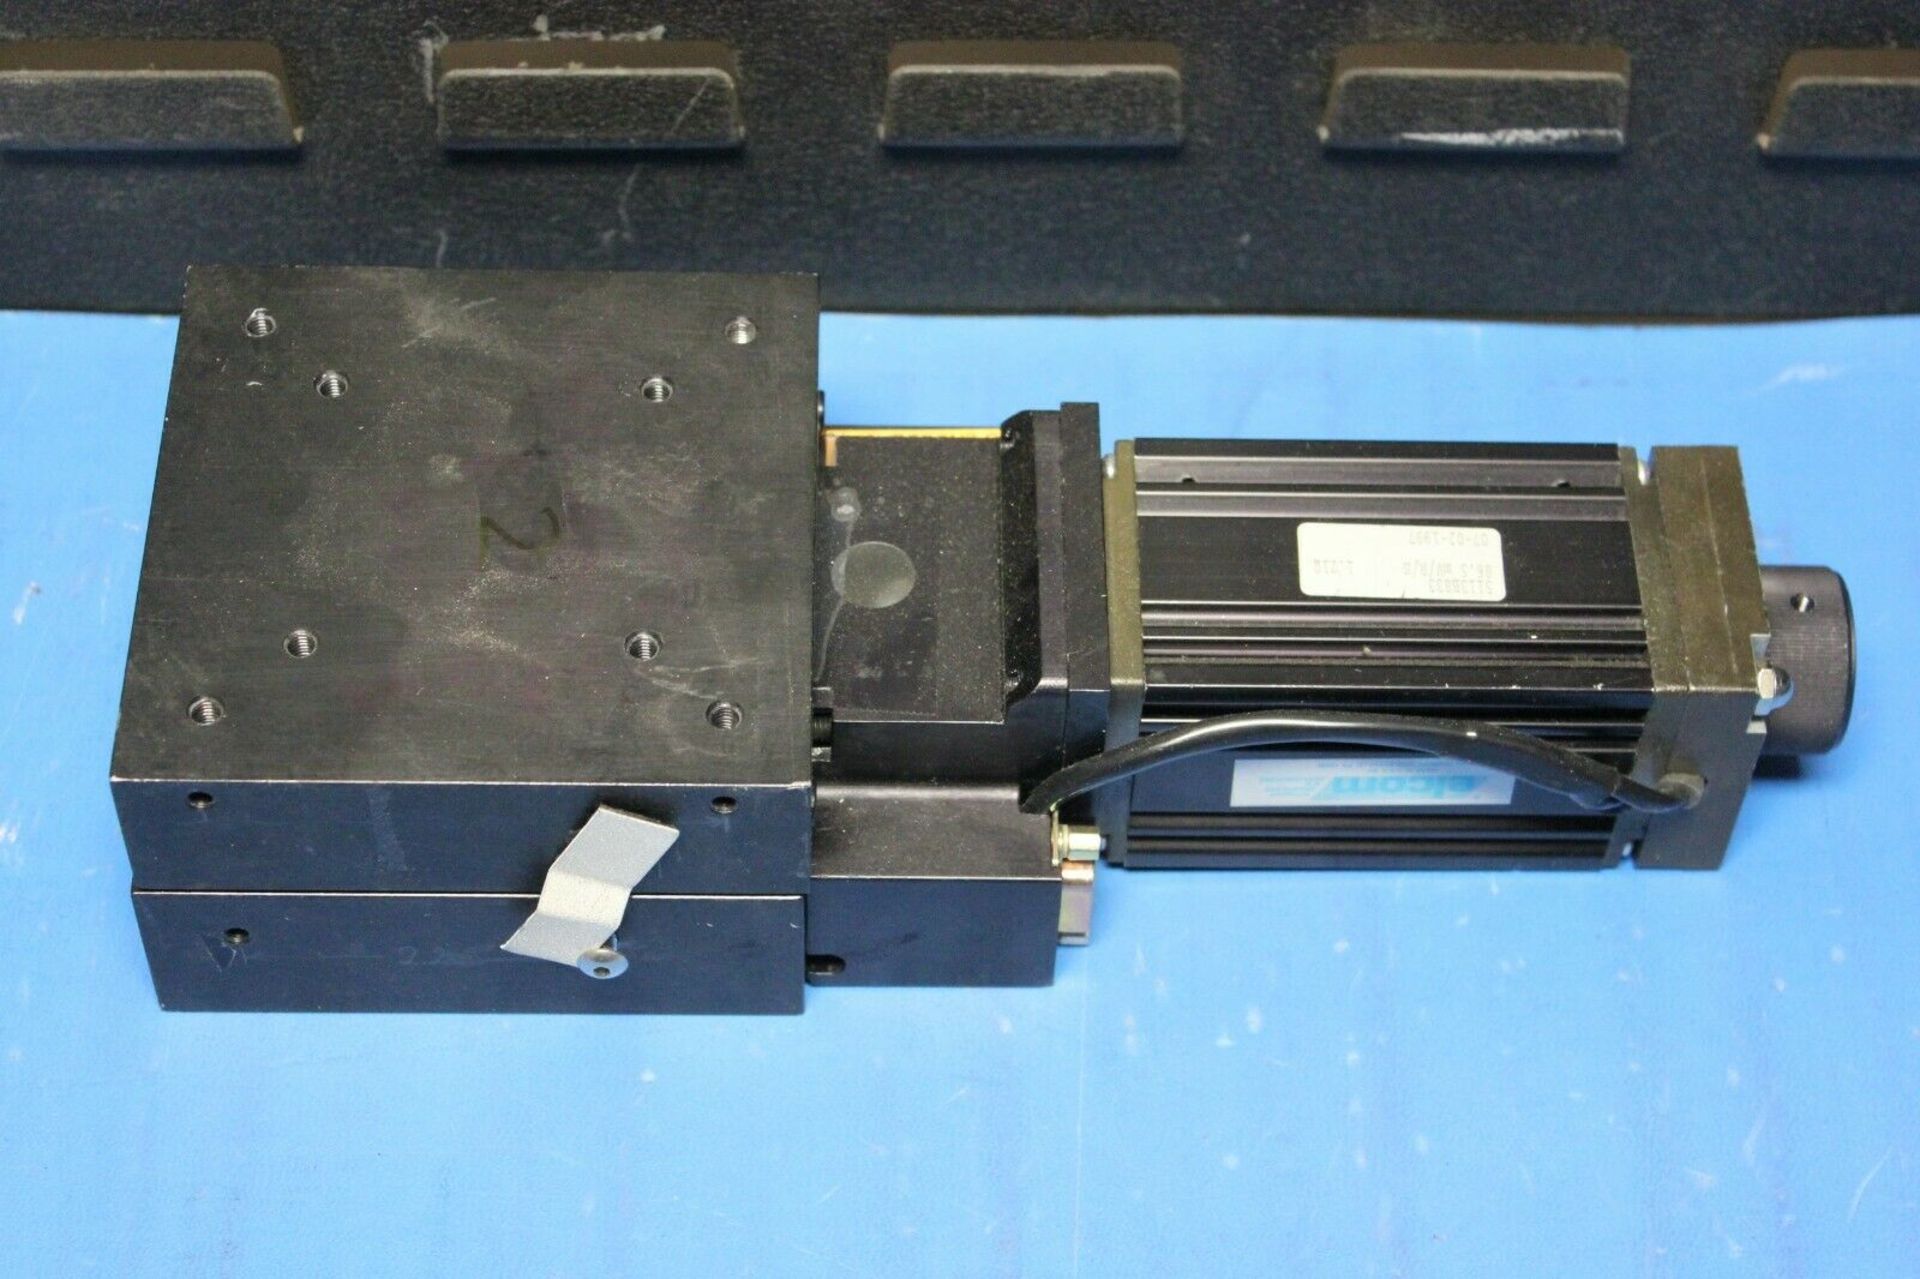 NEAT LINEAR STAGE WITH ELCOM BRUSHLESS SERVO MOTOR